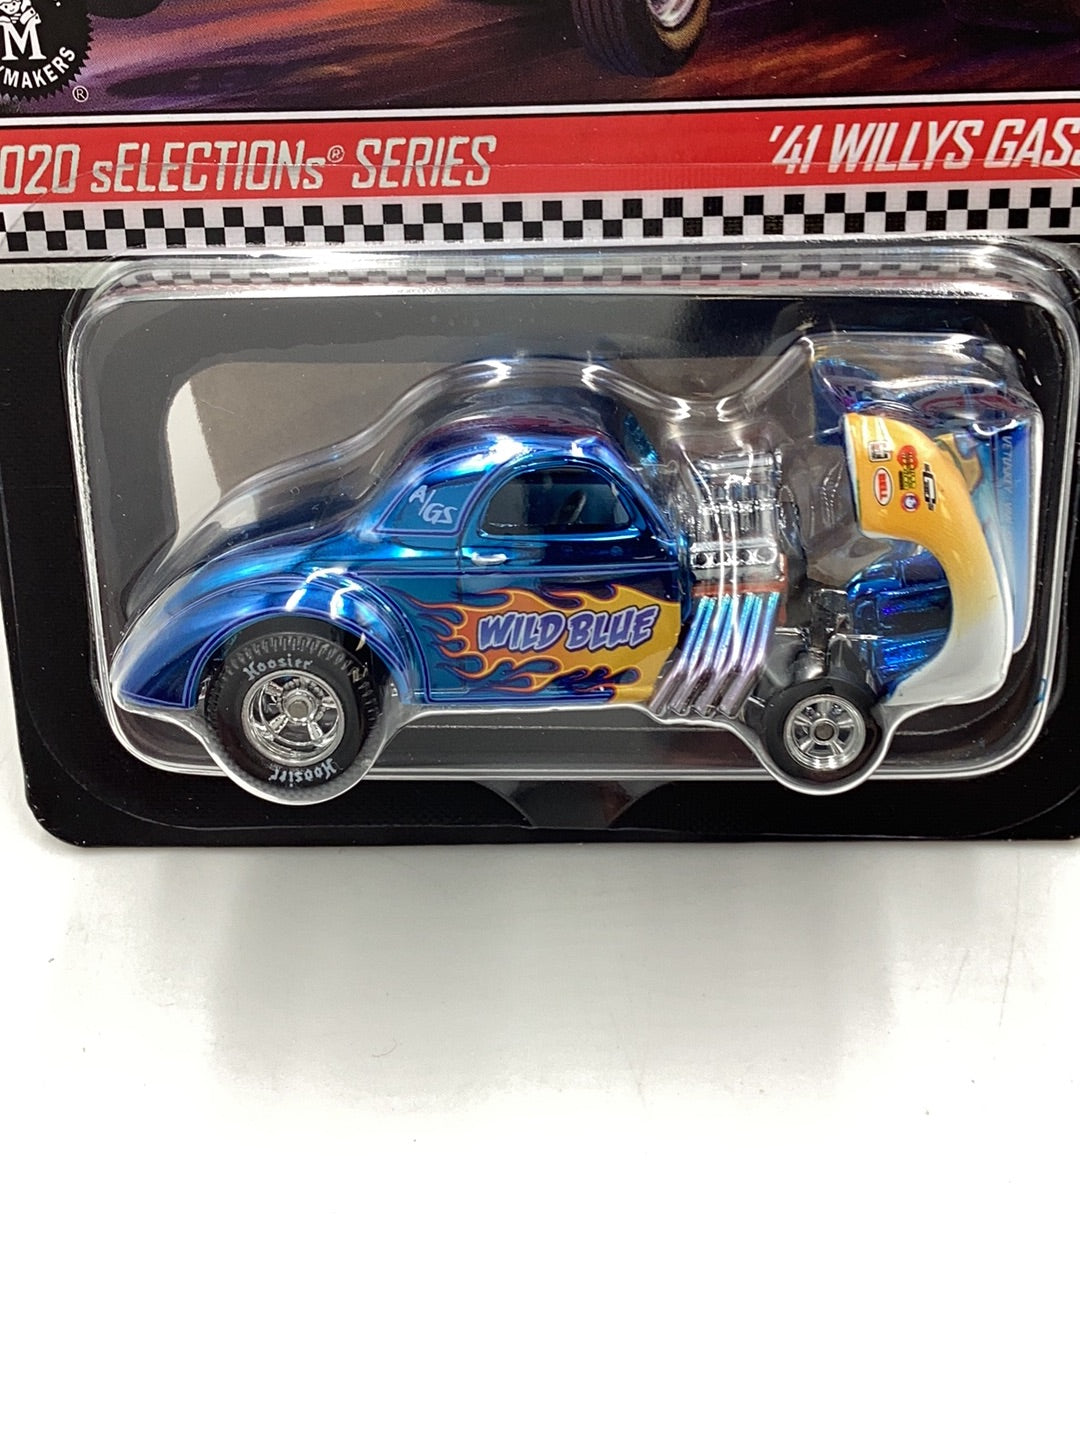 Hot wheels redline club 41 Willys Gasser with protector